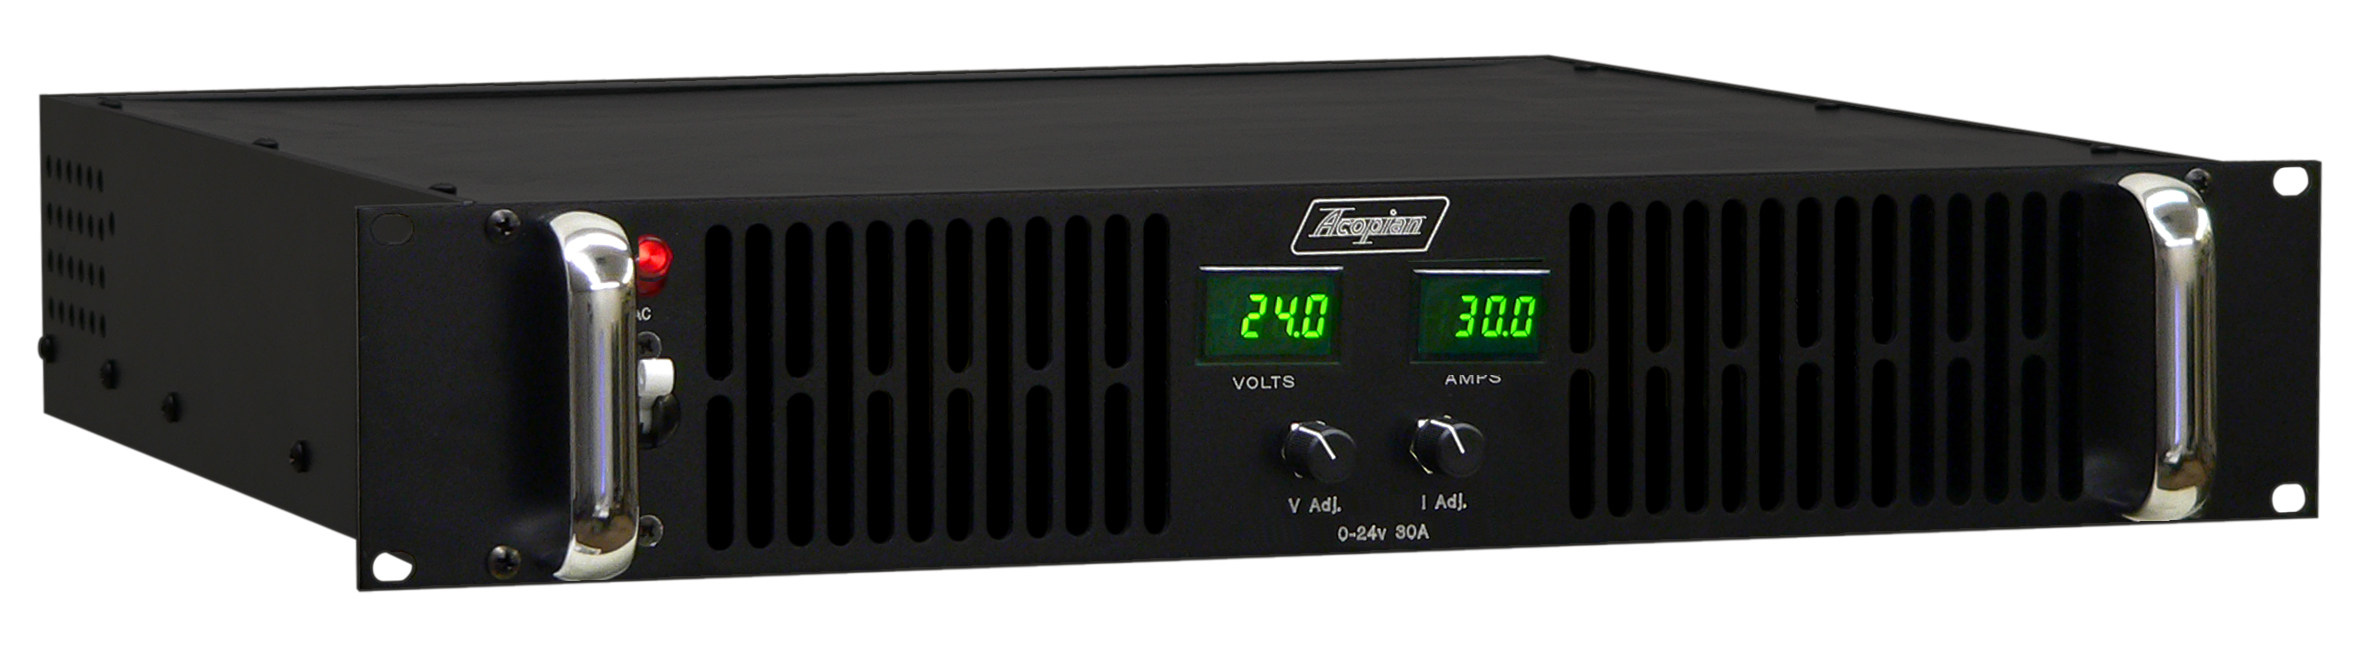 Programmable AC-DC Power Supply Provides 1400W in Rack & Benchtop Configurations